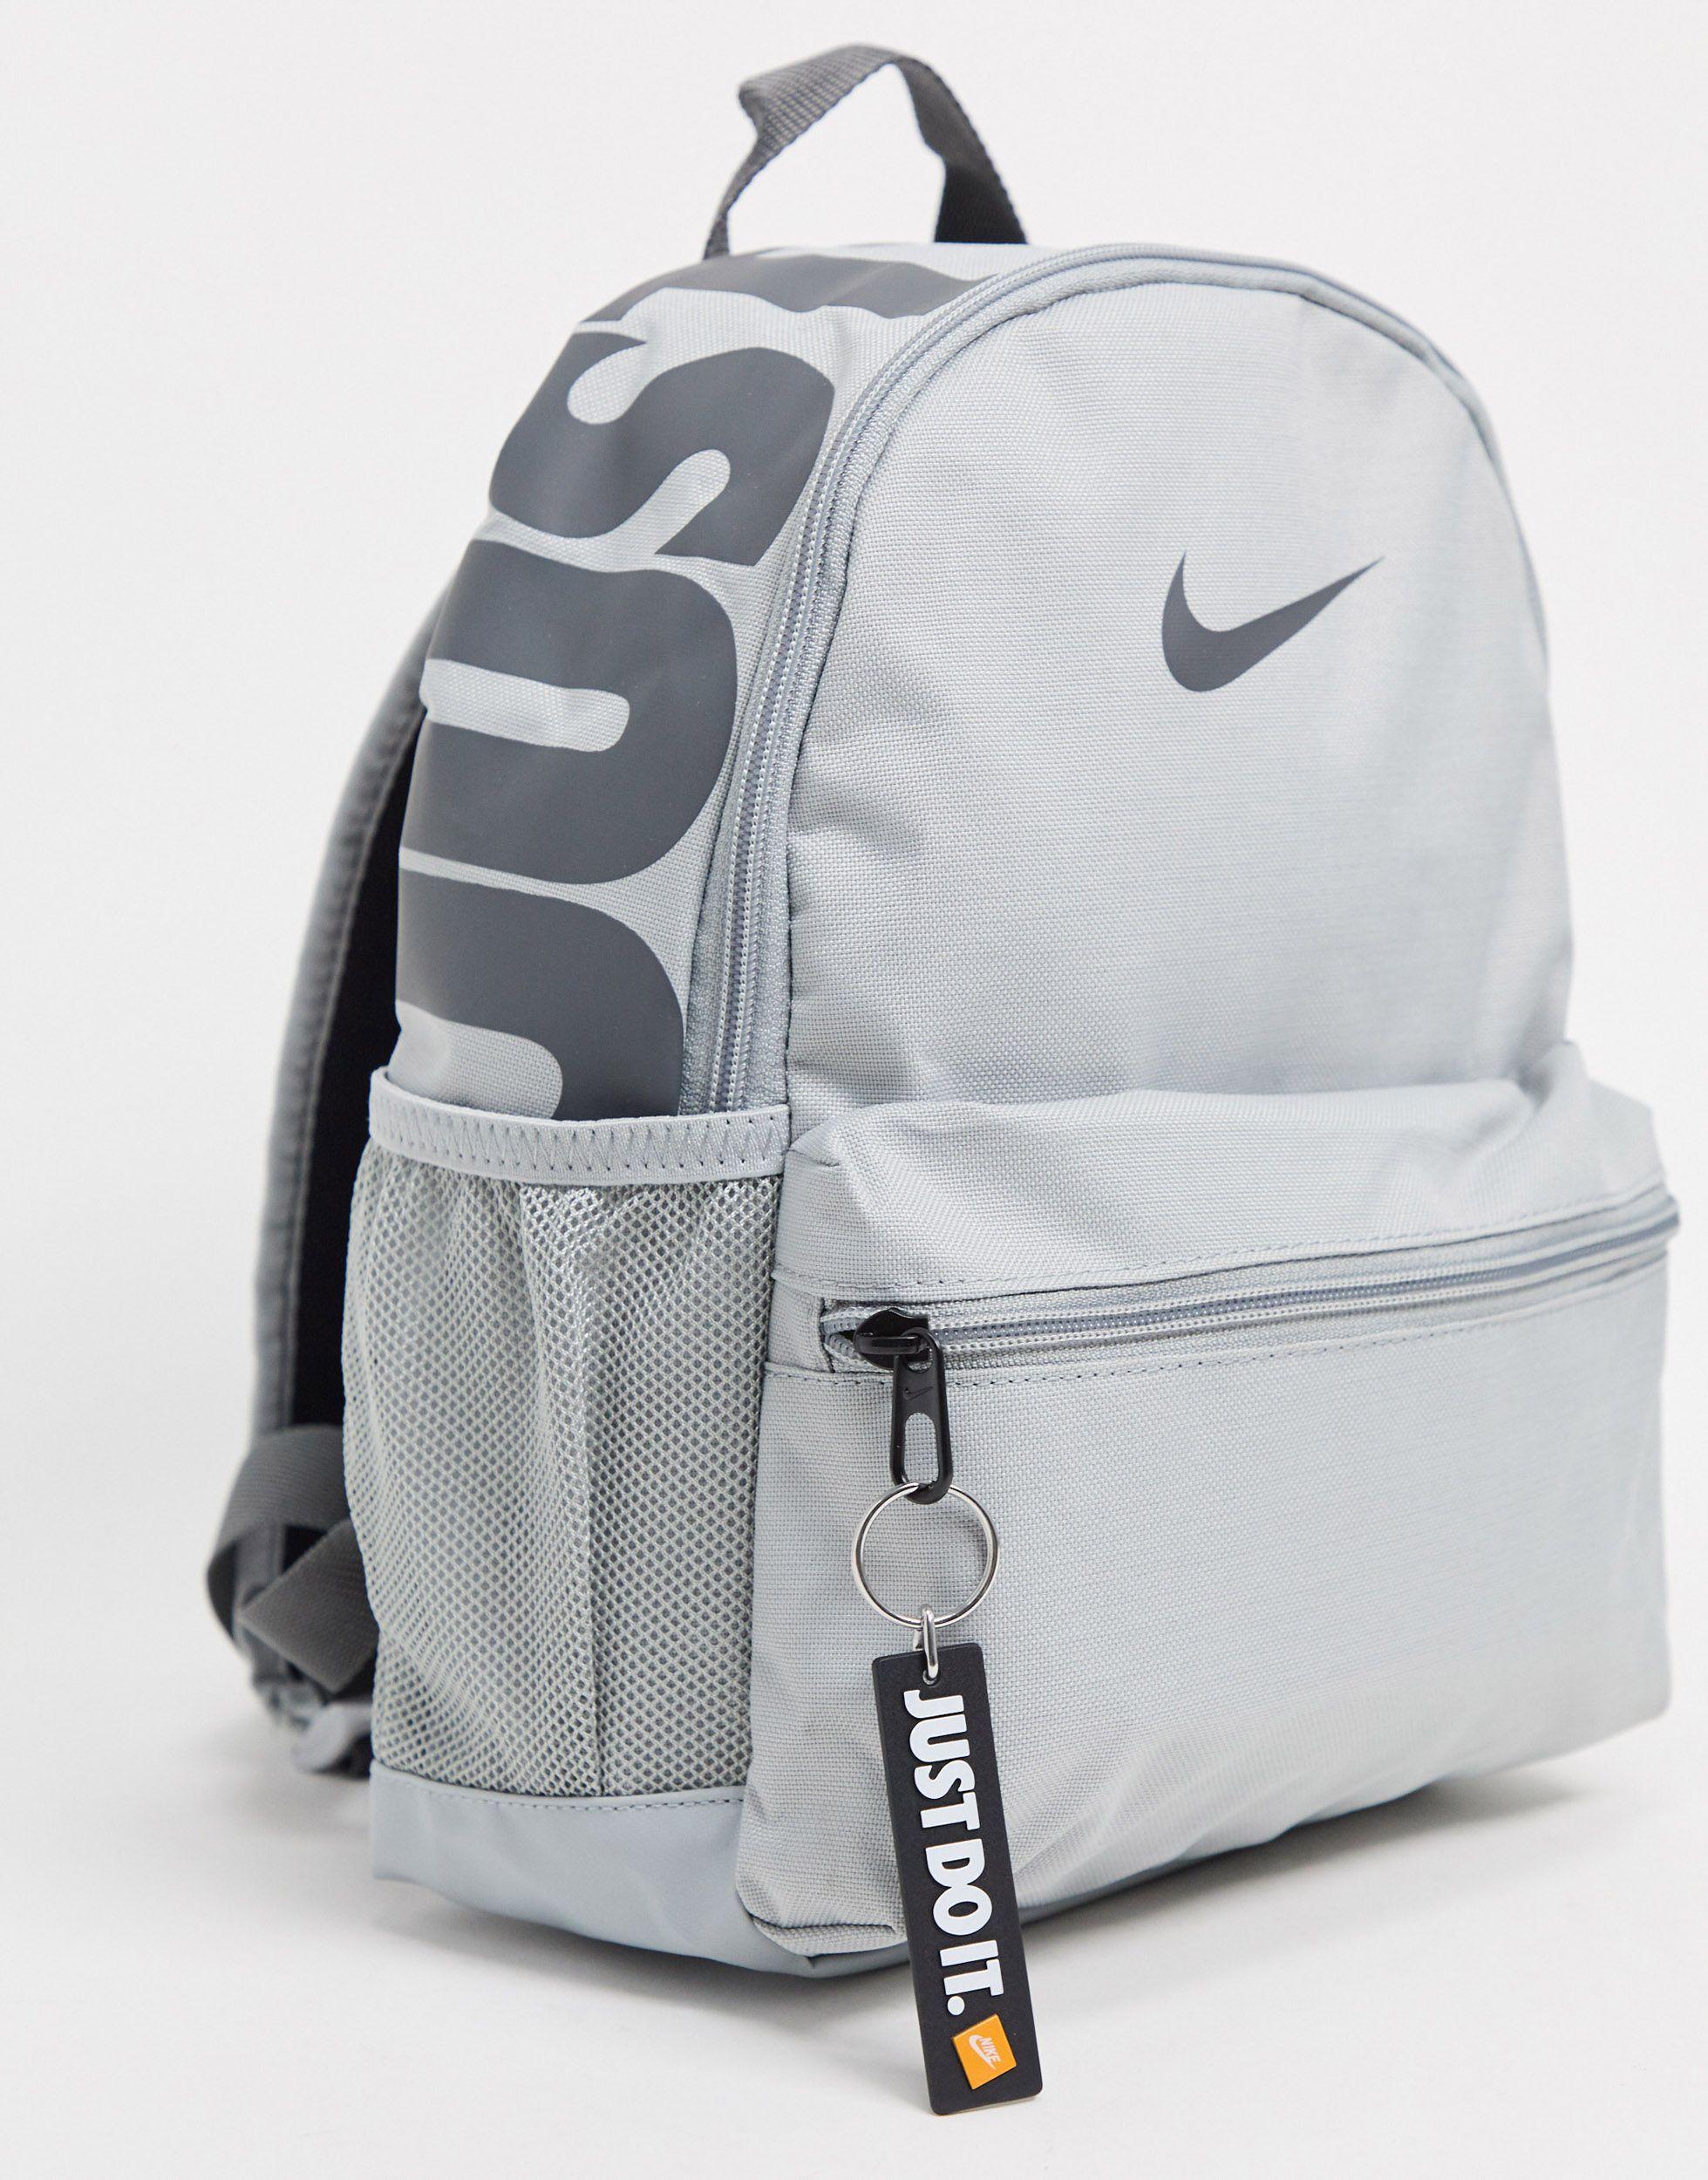 Nike Just Do It Mini Backpack | escapeauthority.com